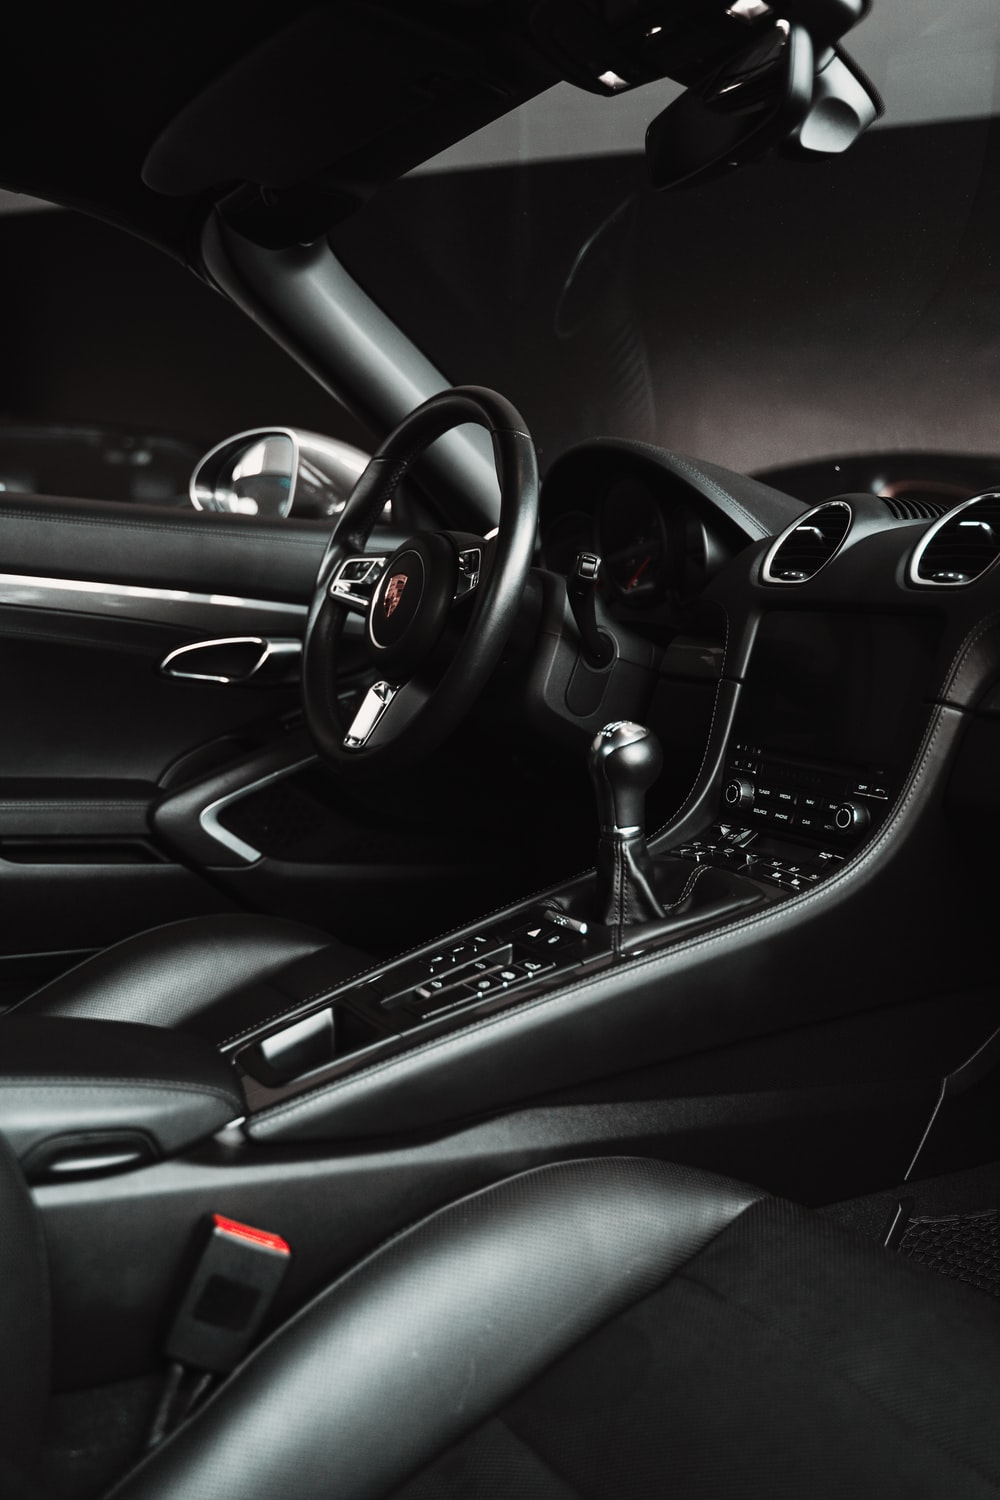 Car Interior Picture. Download Free Image